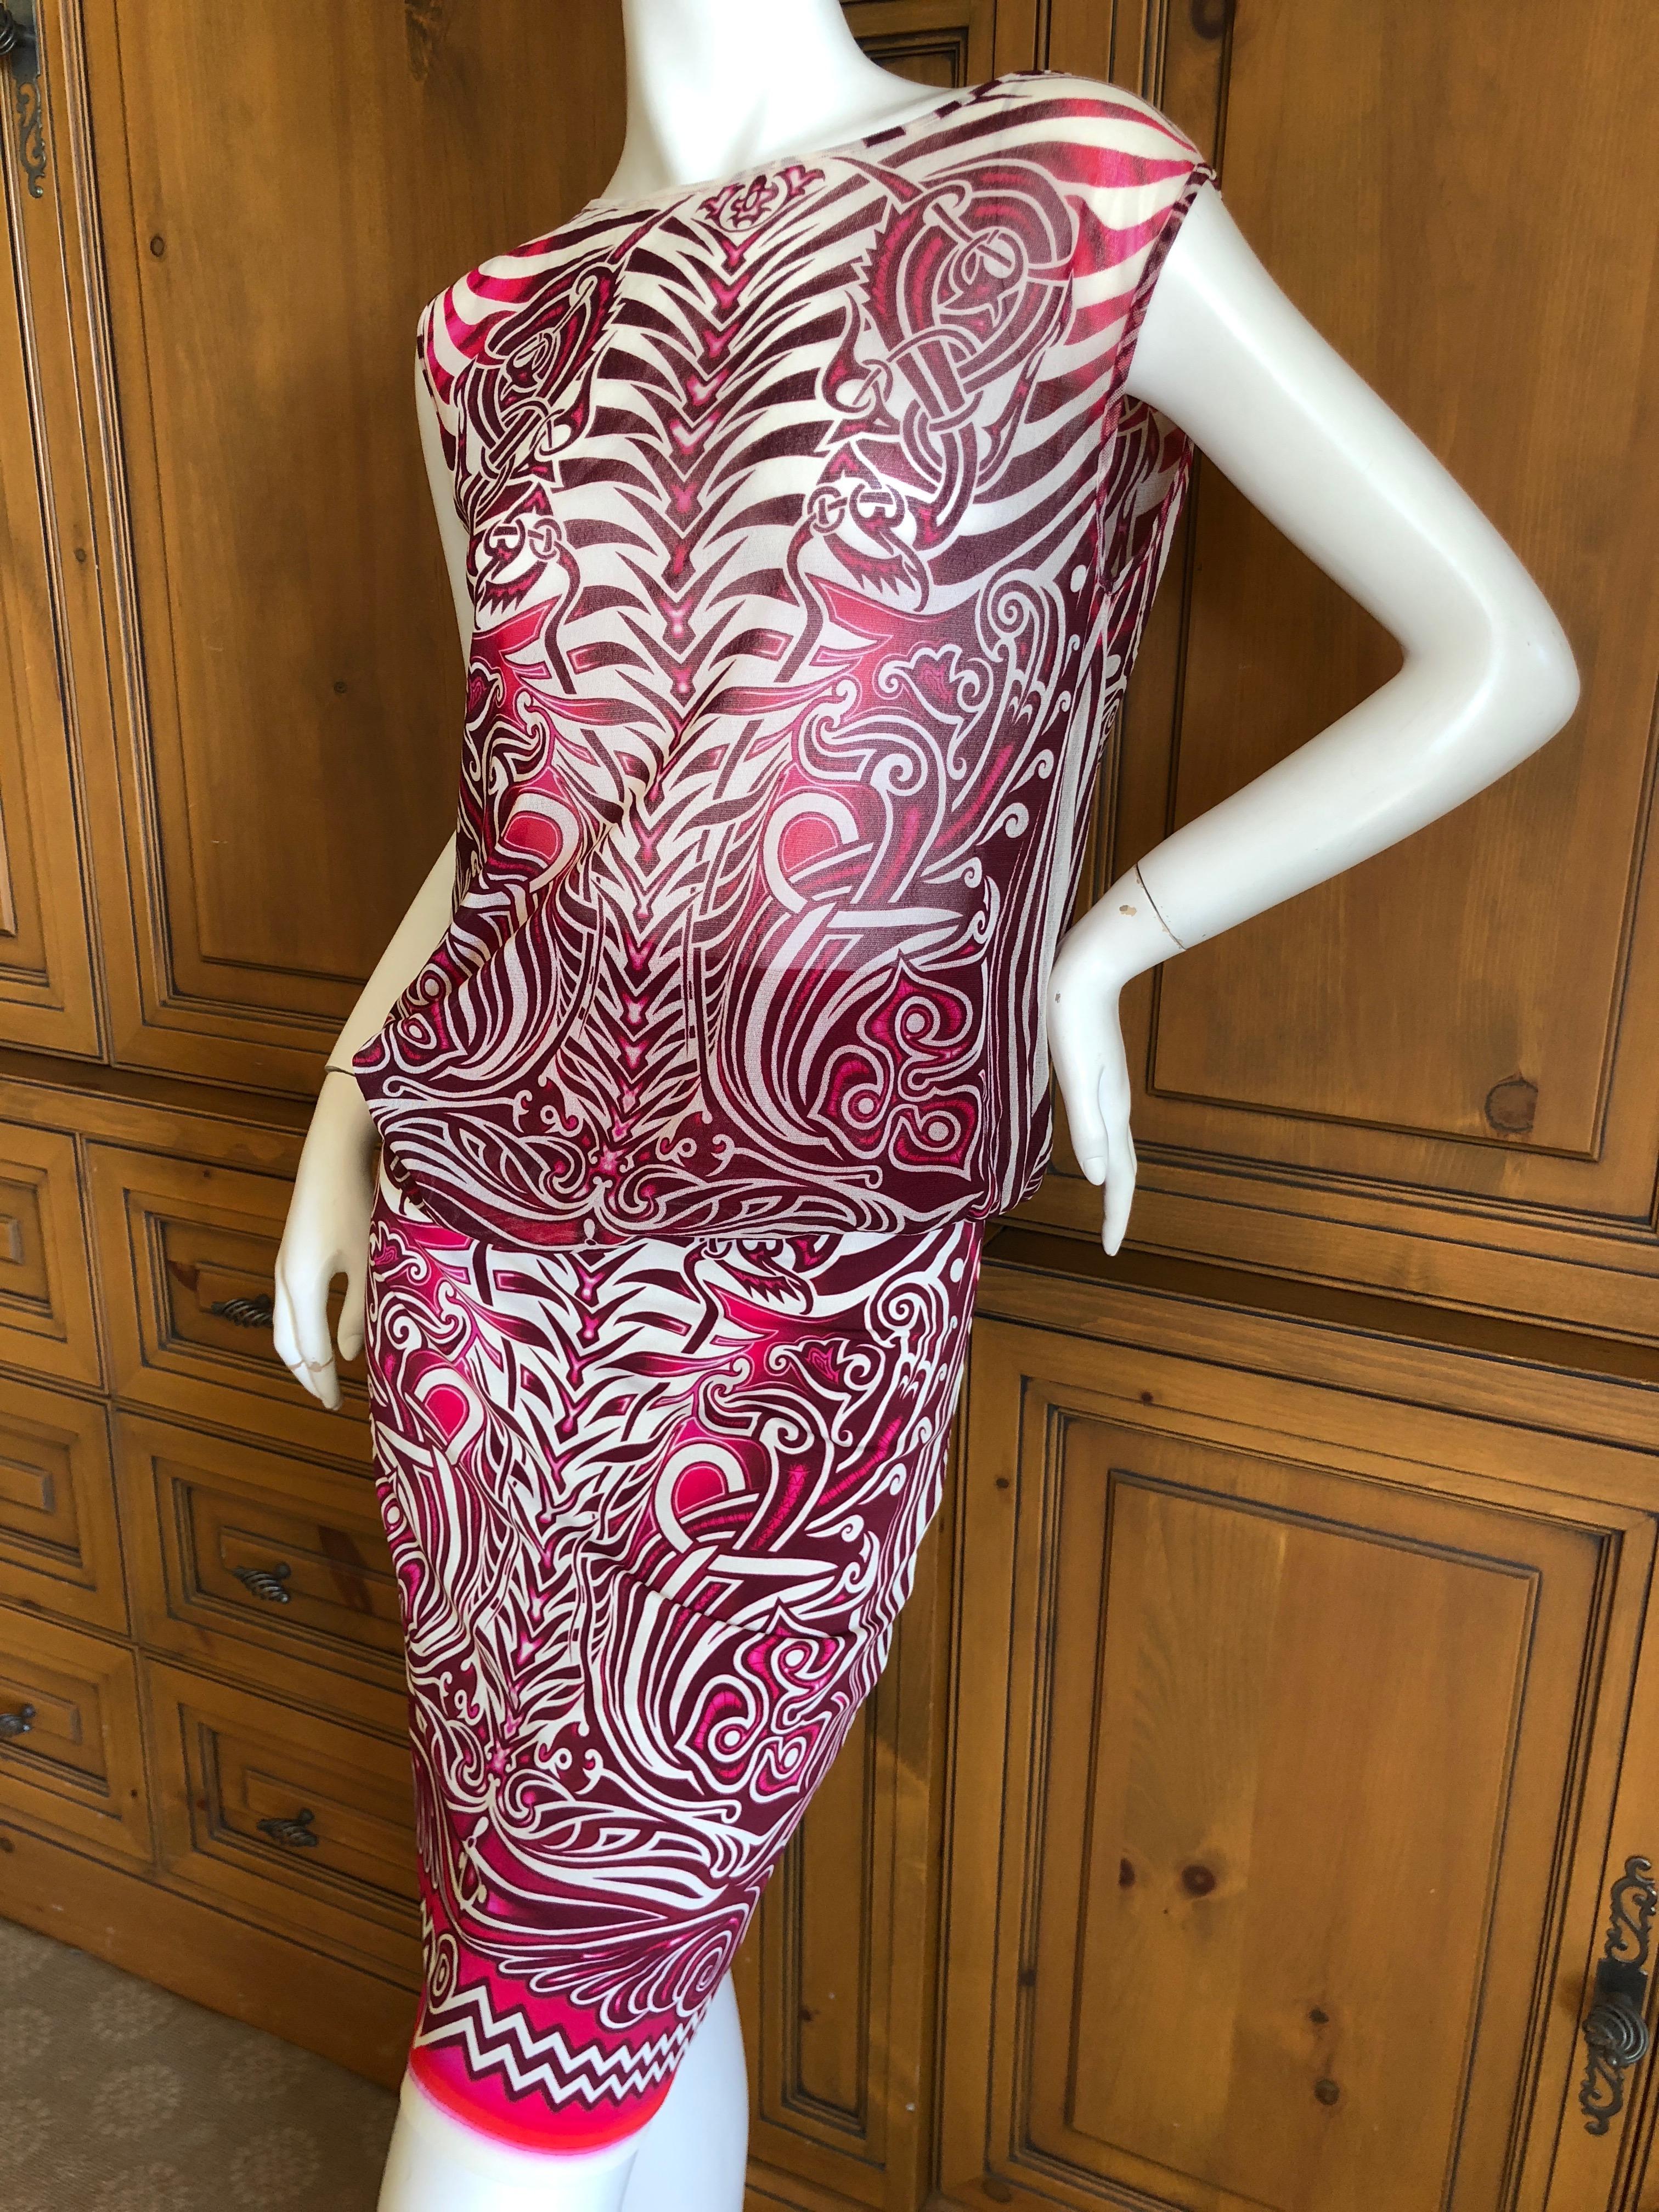 Jean Paul Gaultier Soleil Sheer Maori Tattoo Print Dress In Excellent Condition For Sale In Cloverdale, CA